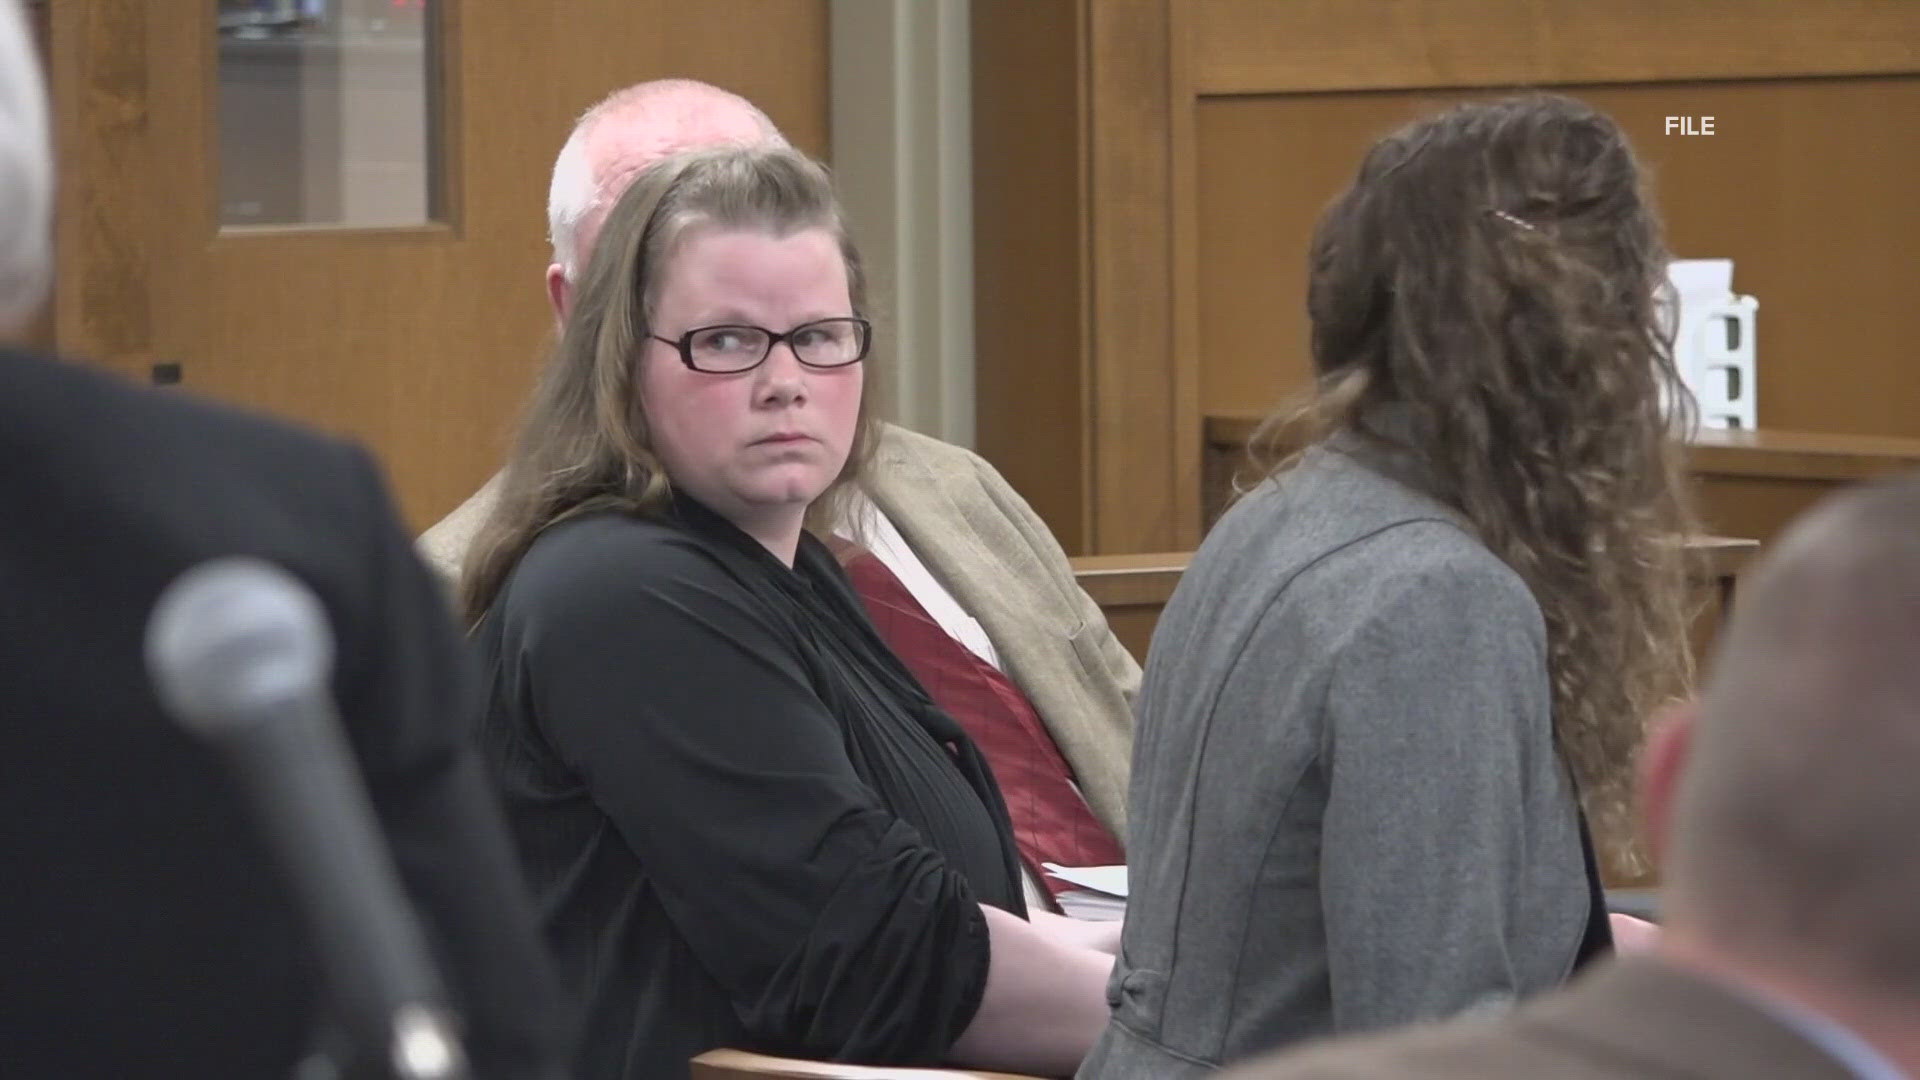 The Maine Supreme Judicial Court is affirming the murder conviction and sentencing for Jessica Williams for the death of 3-year-old Maddox Williams.